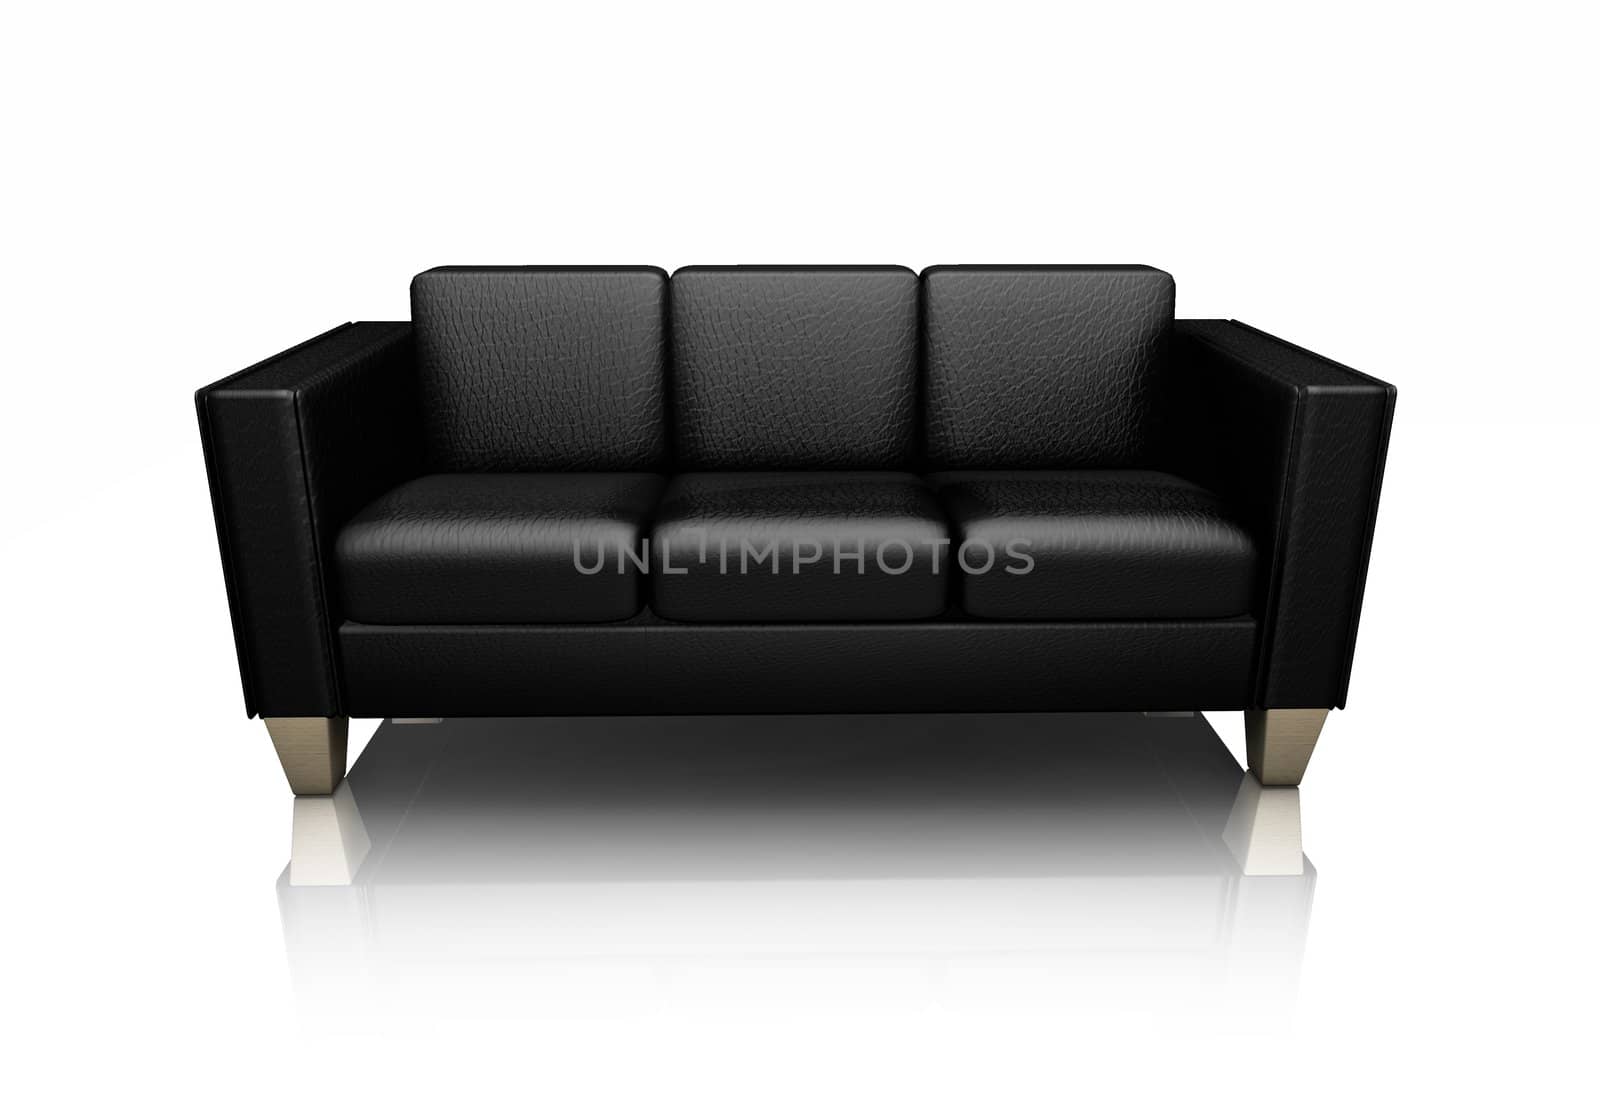 3D render of a black leather settee